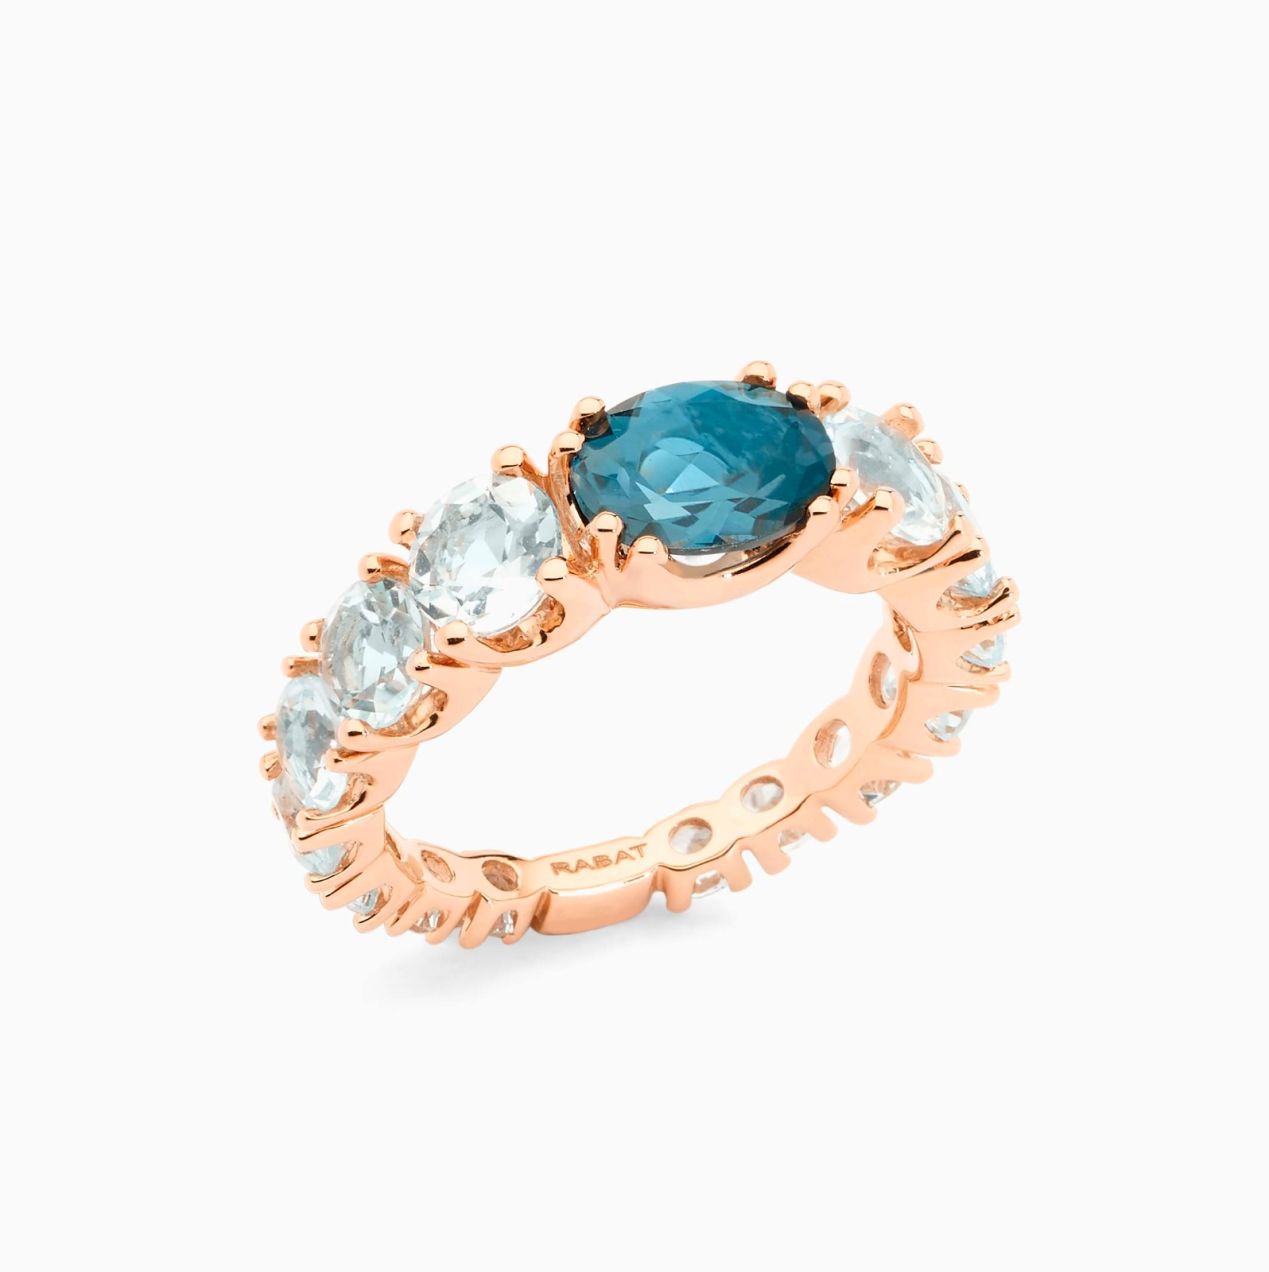 Rose Gold ring with London topacies gems and arm with sky topacies